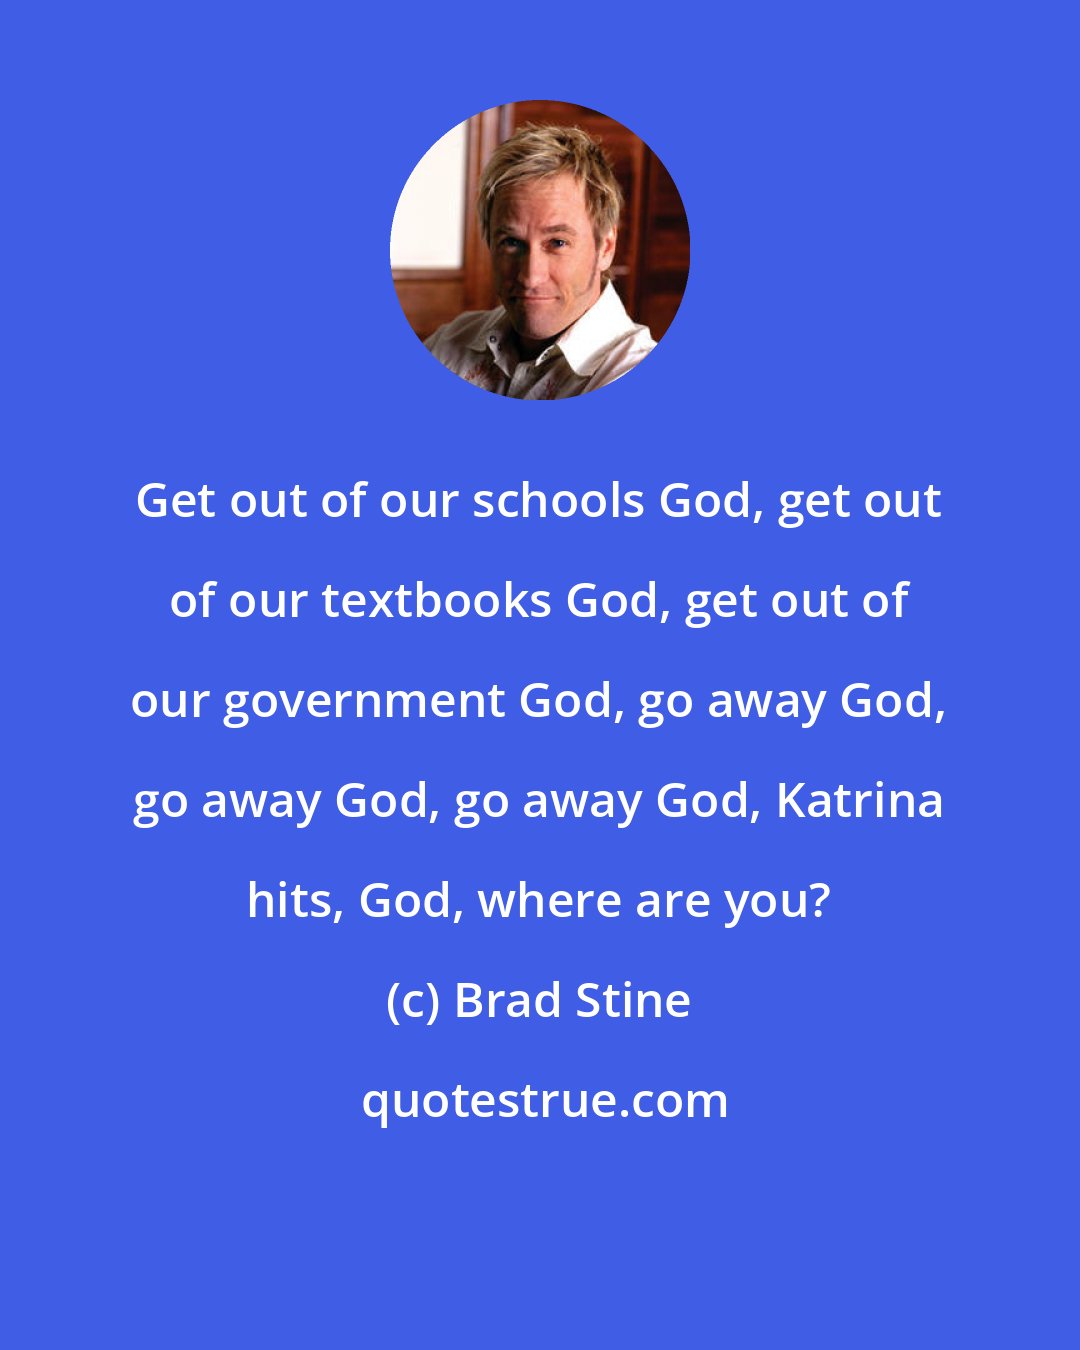 Brad Stine: Get out of our schools God, get out of our textbooks God, get out of our government God, go away God, go away God, go away God, Katrina hits, God, where are you?